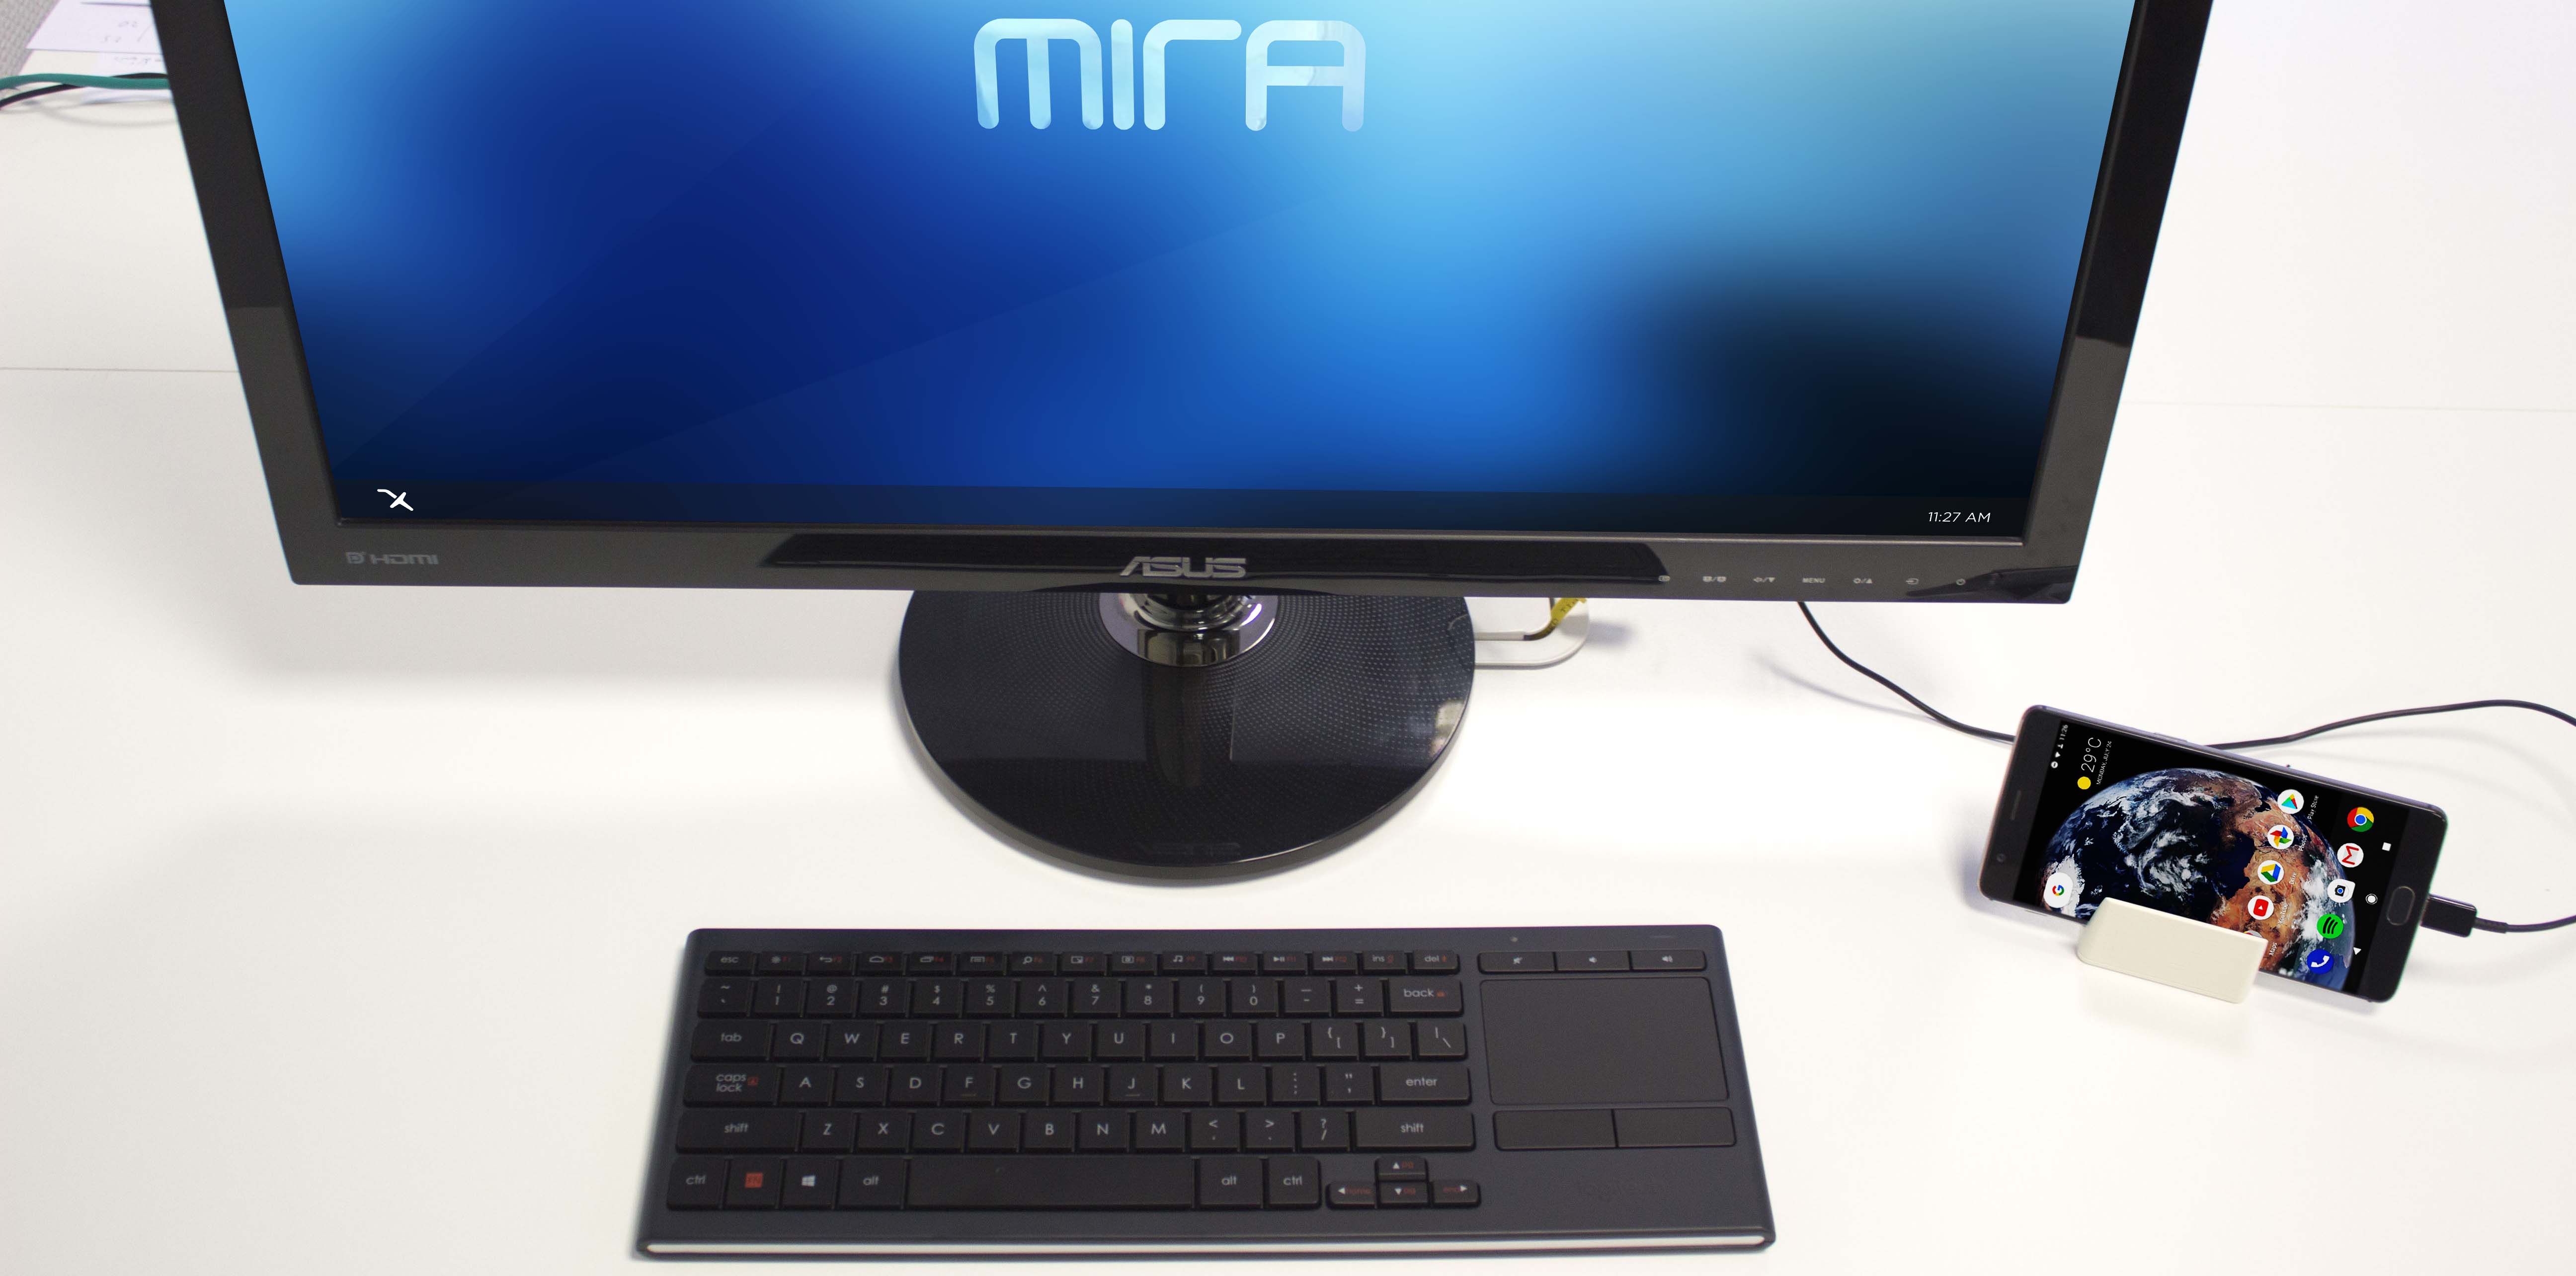 Mirabook team intros Mira PC Mode app sans the dock - Android Community